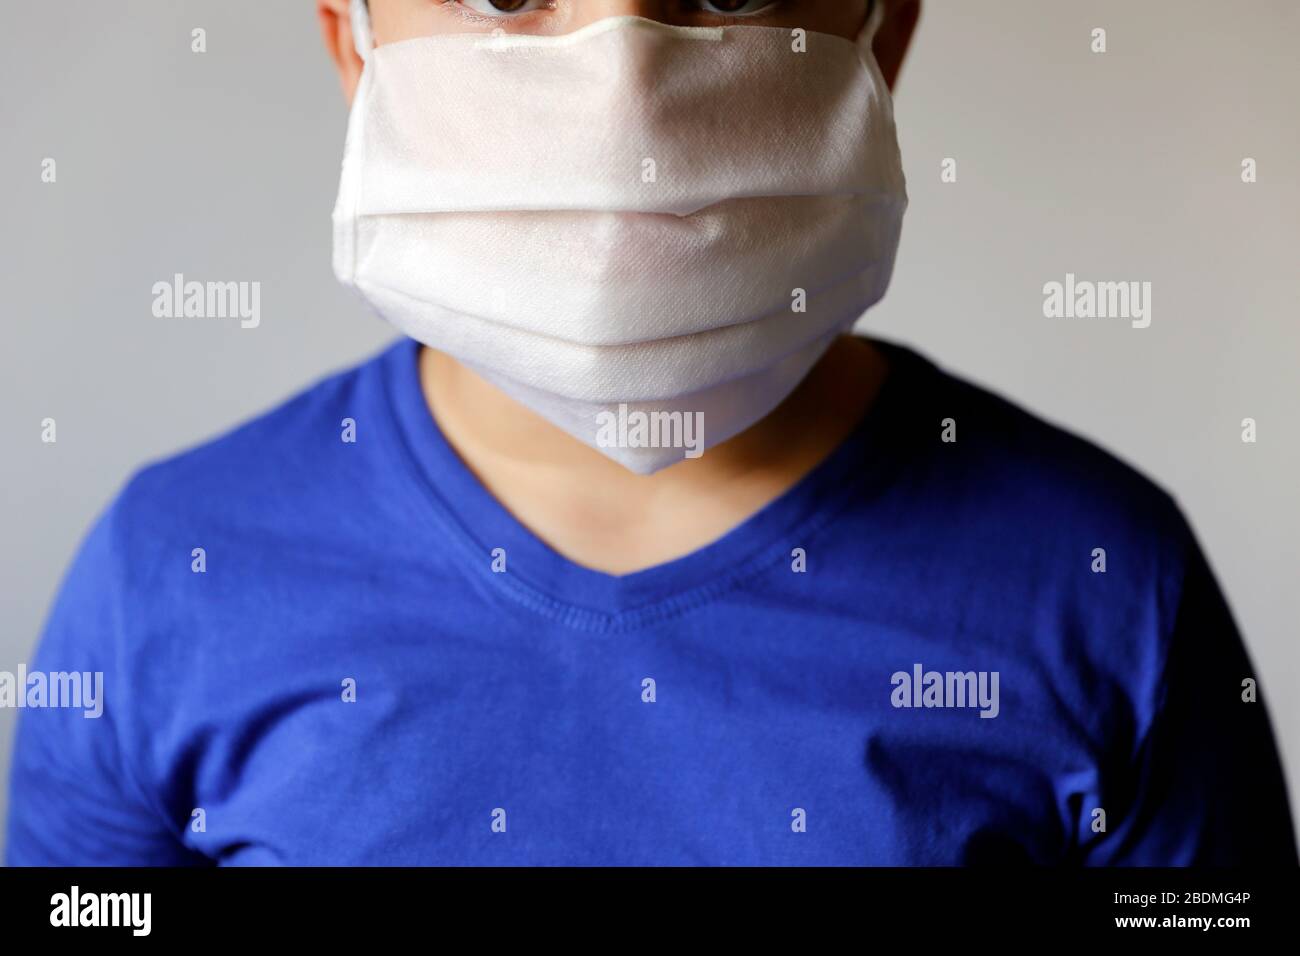 boy wears medical mask for medical treatment and protection Covid-19 coronavirus pollution and respiratory diseases Stock Photo